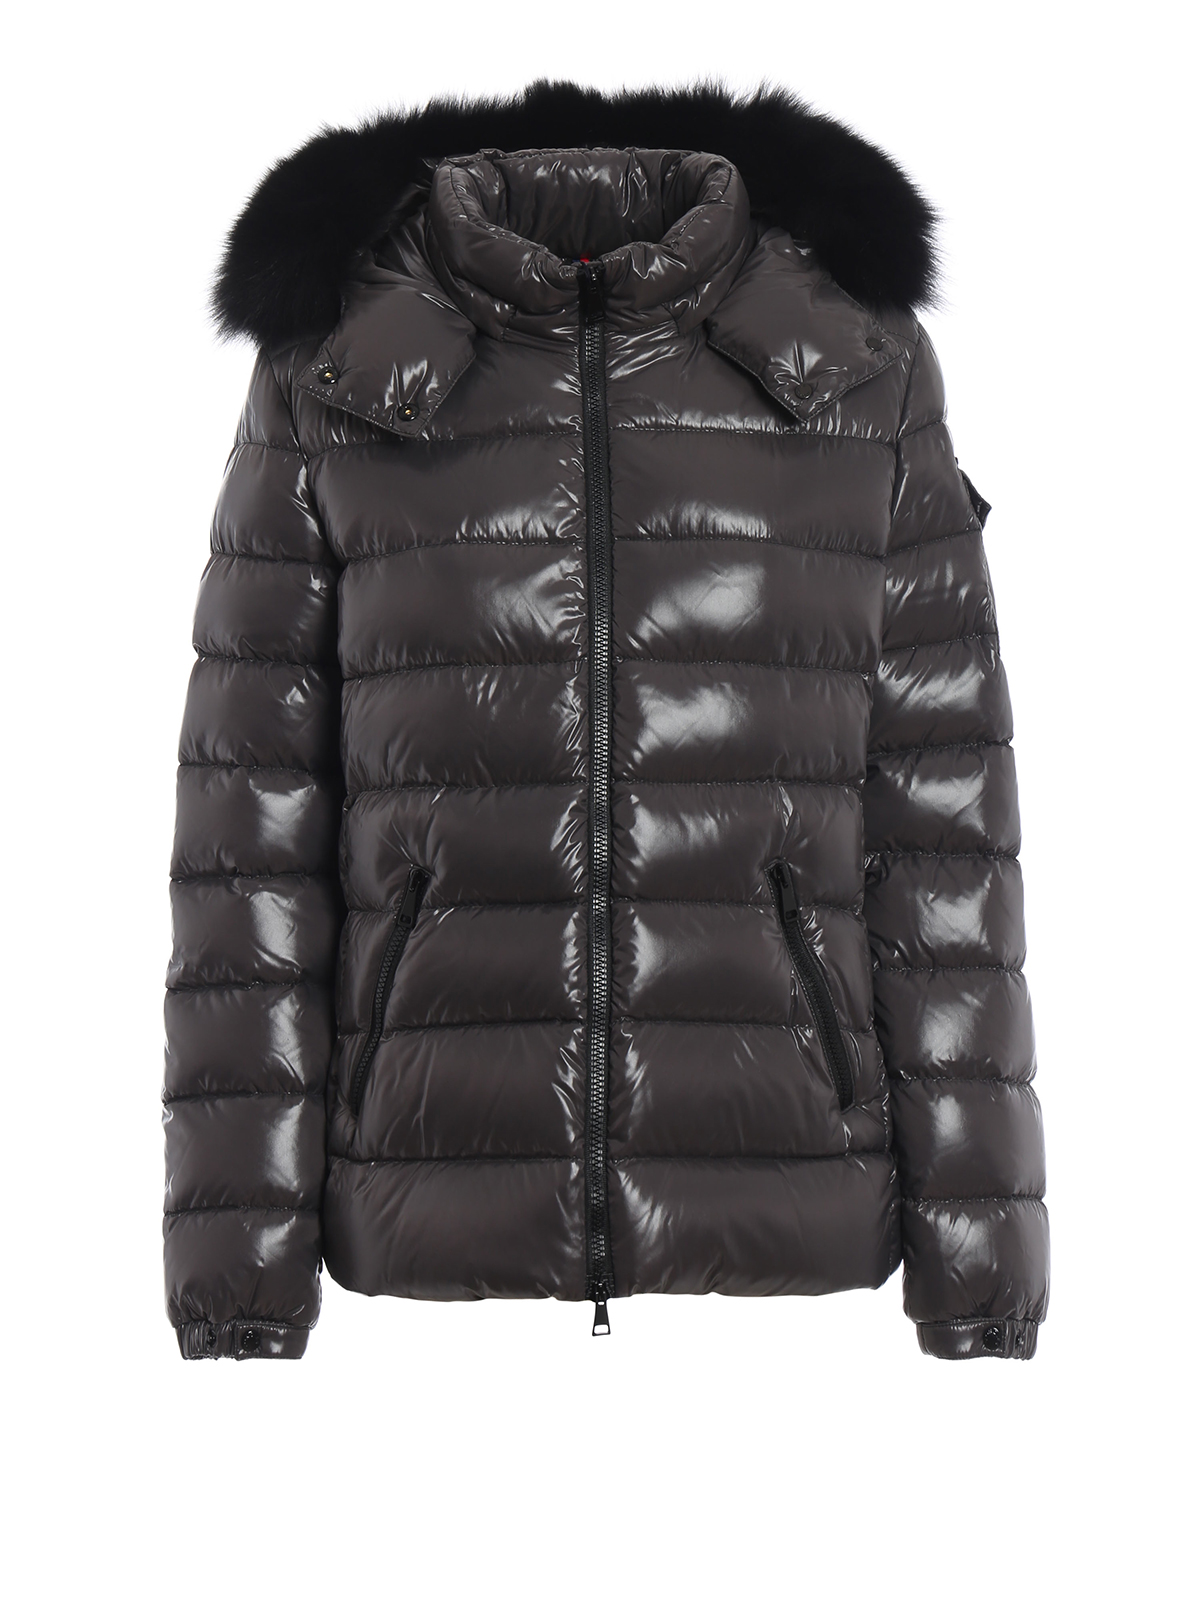 grey moncler coat with fur hood,OFF 57%,www.concordehotels.com.tr